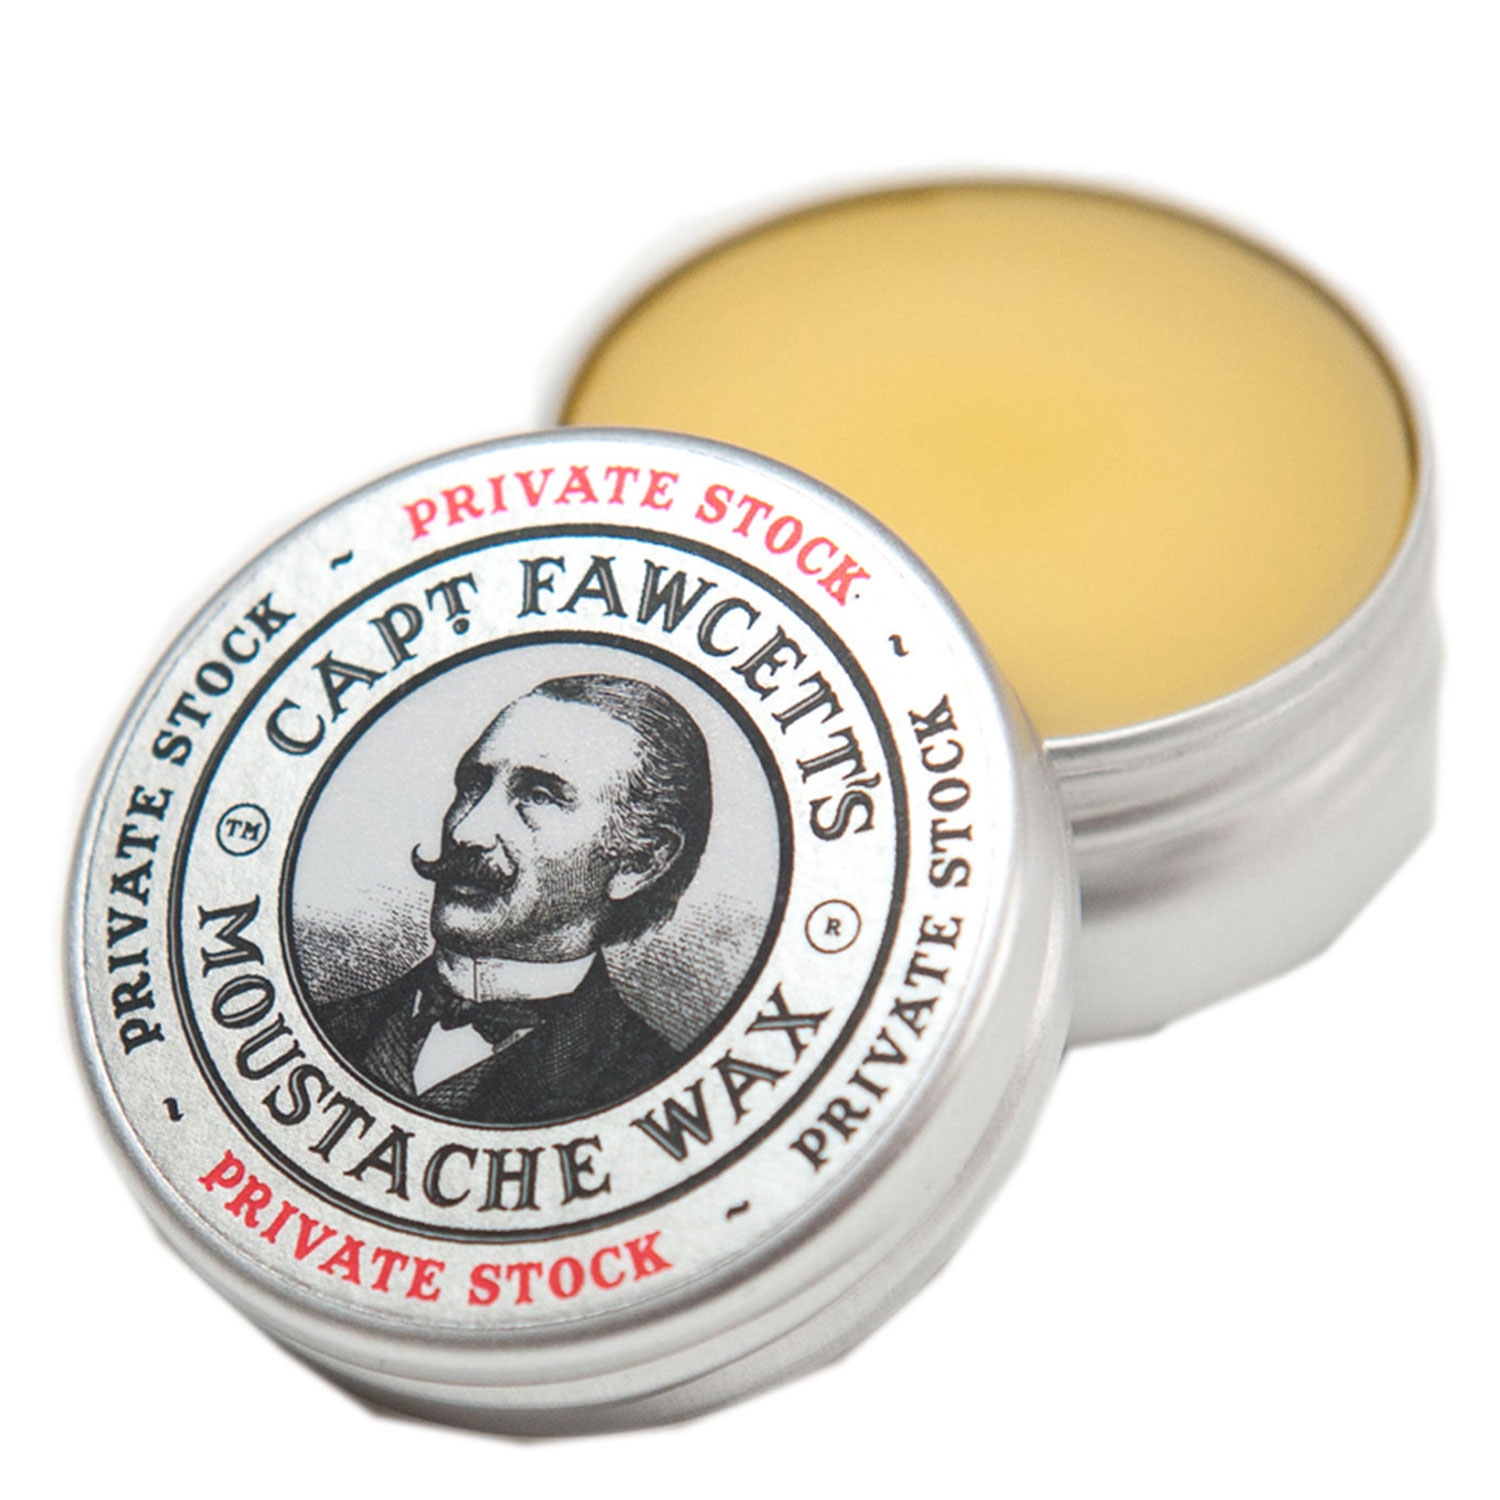 Product image from Capt. Fawcett Care - Private Stock Moustache Wax